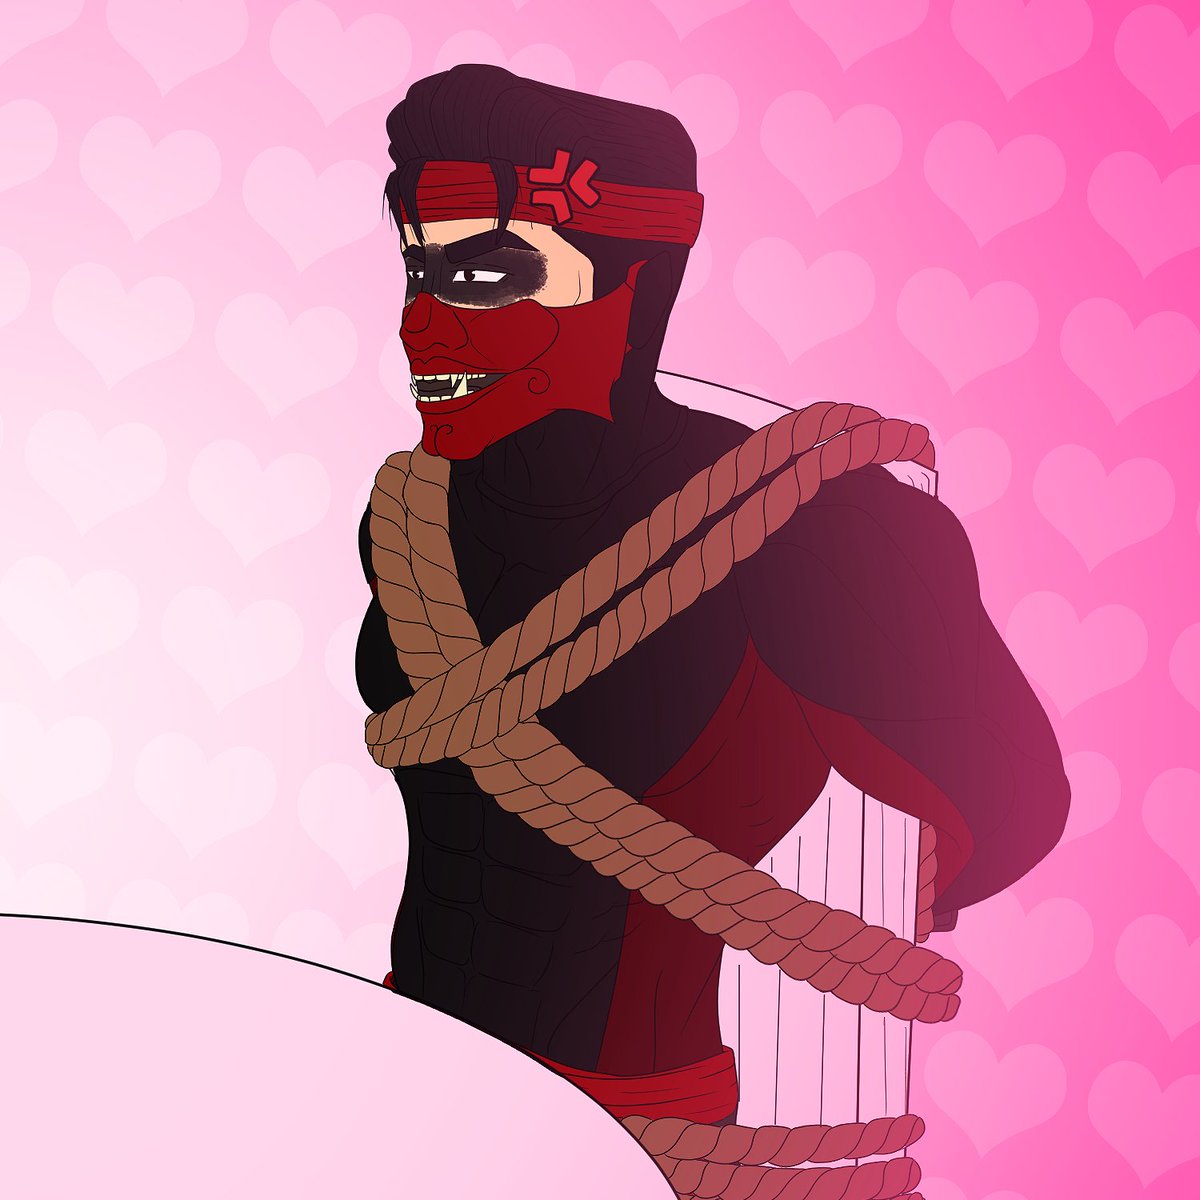 Happy ((Late)) Valentines Day💖. and here's Valentine and Samurai Ninja on a 'Romantic' dinner date. somebody help him please